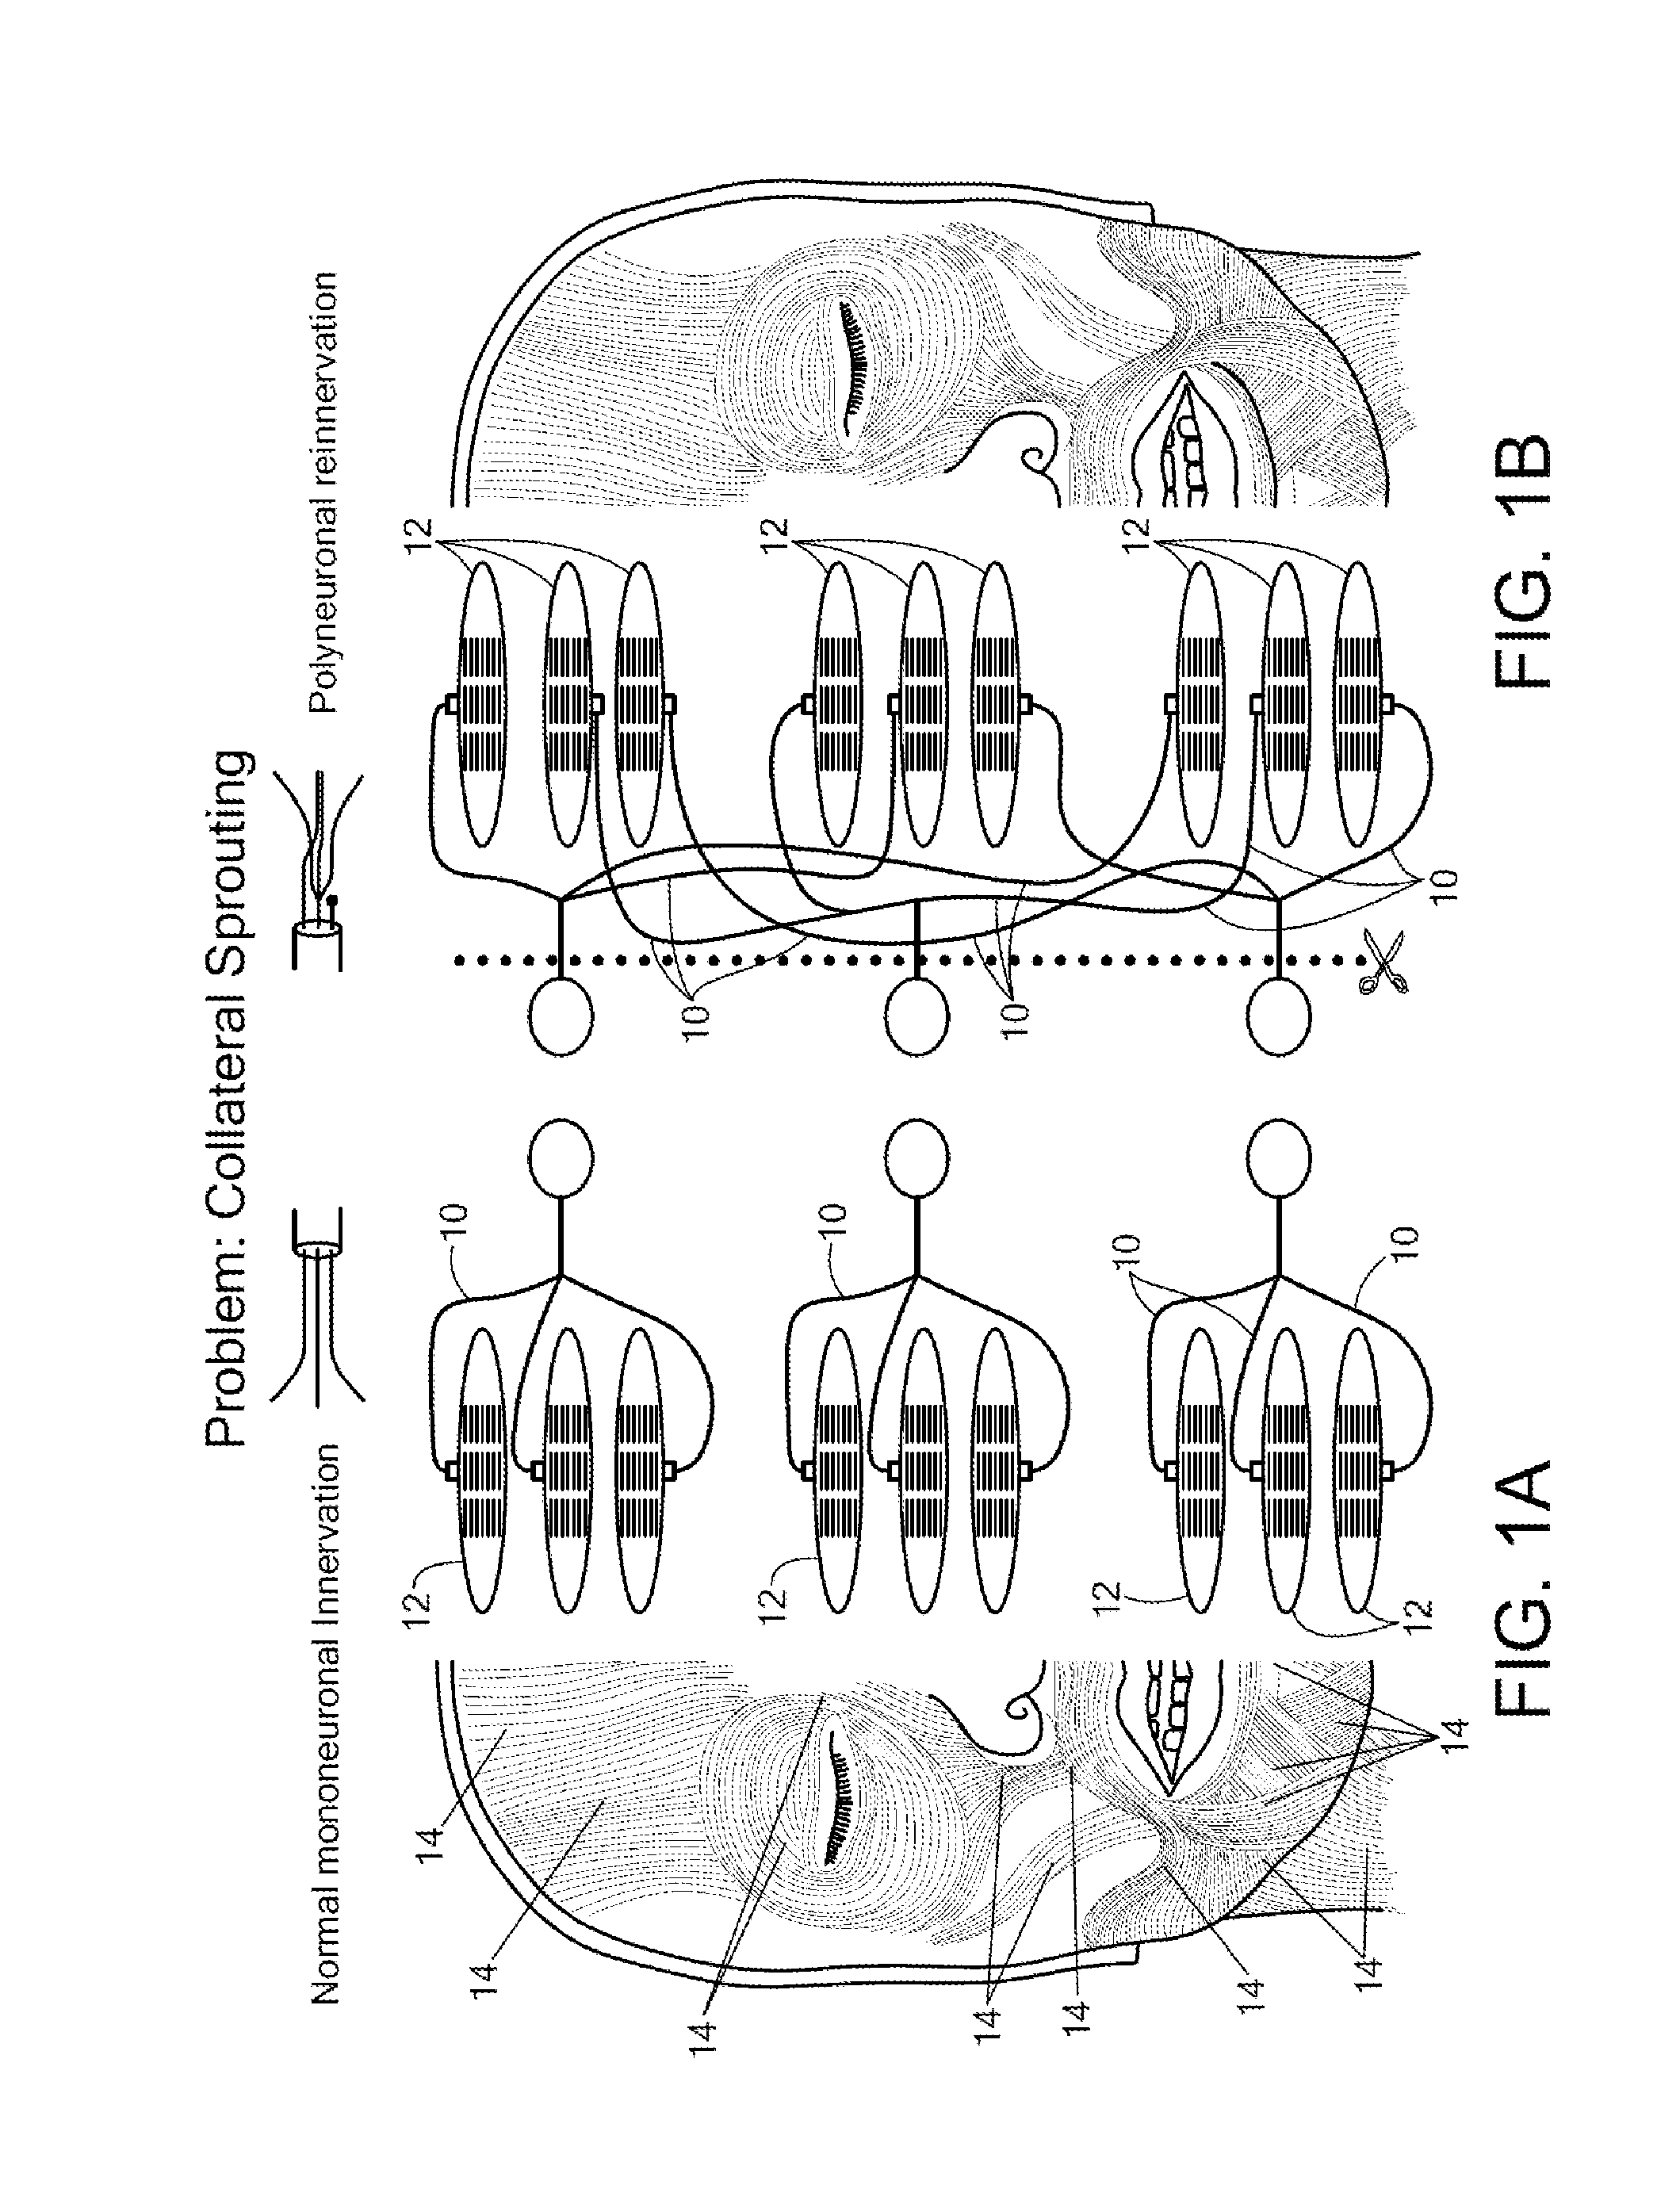 System and Method for Eyelid Simulation